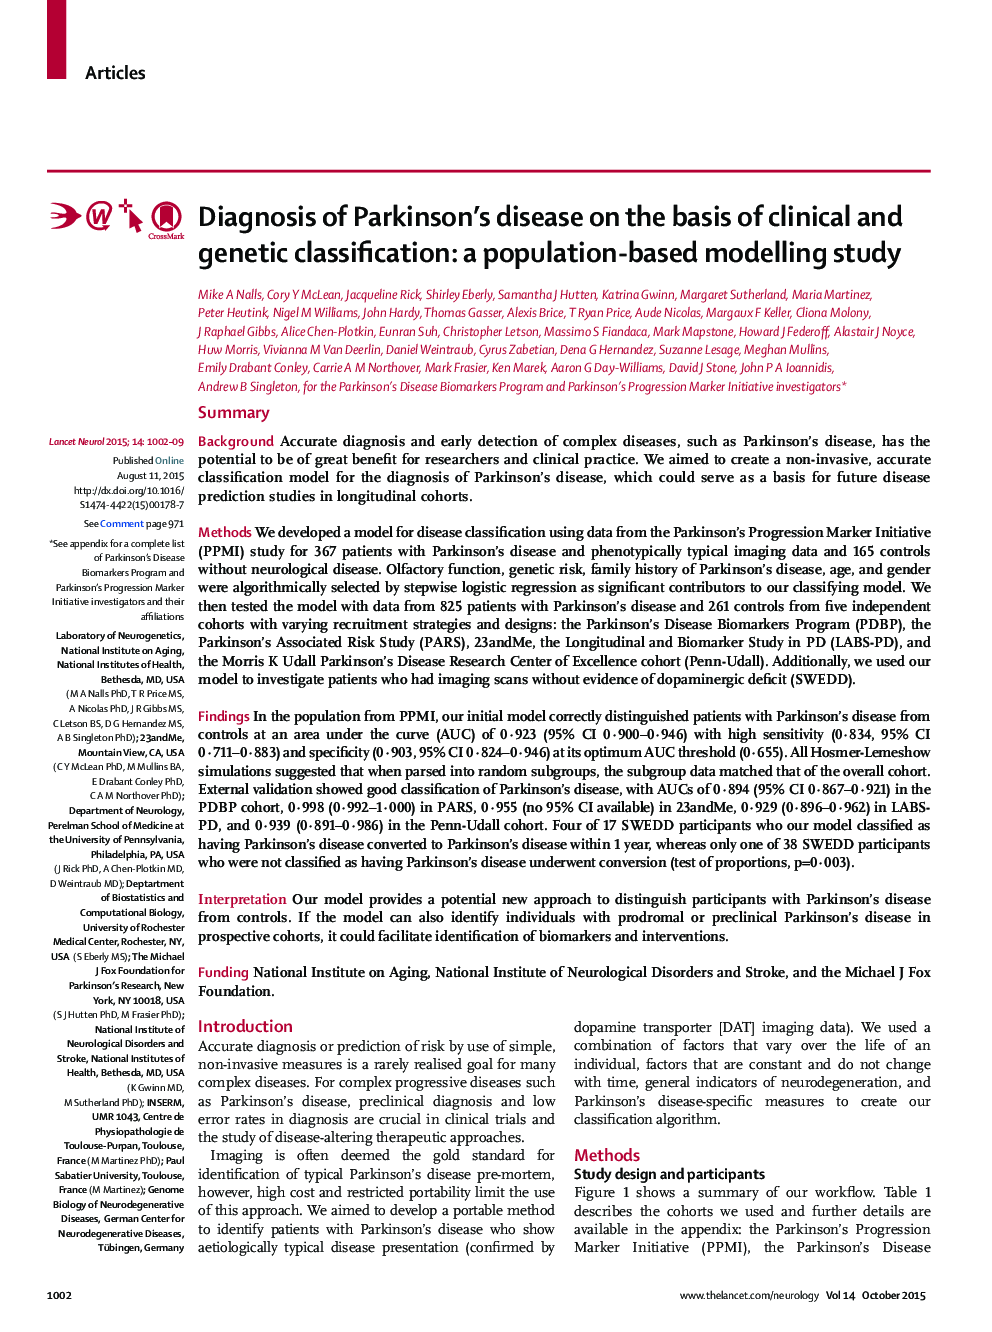 Diagnosis of Parkinson's disease on the basis of clinical and genetic classification: a population-based modelling study